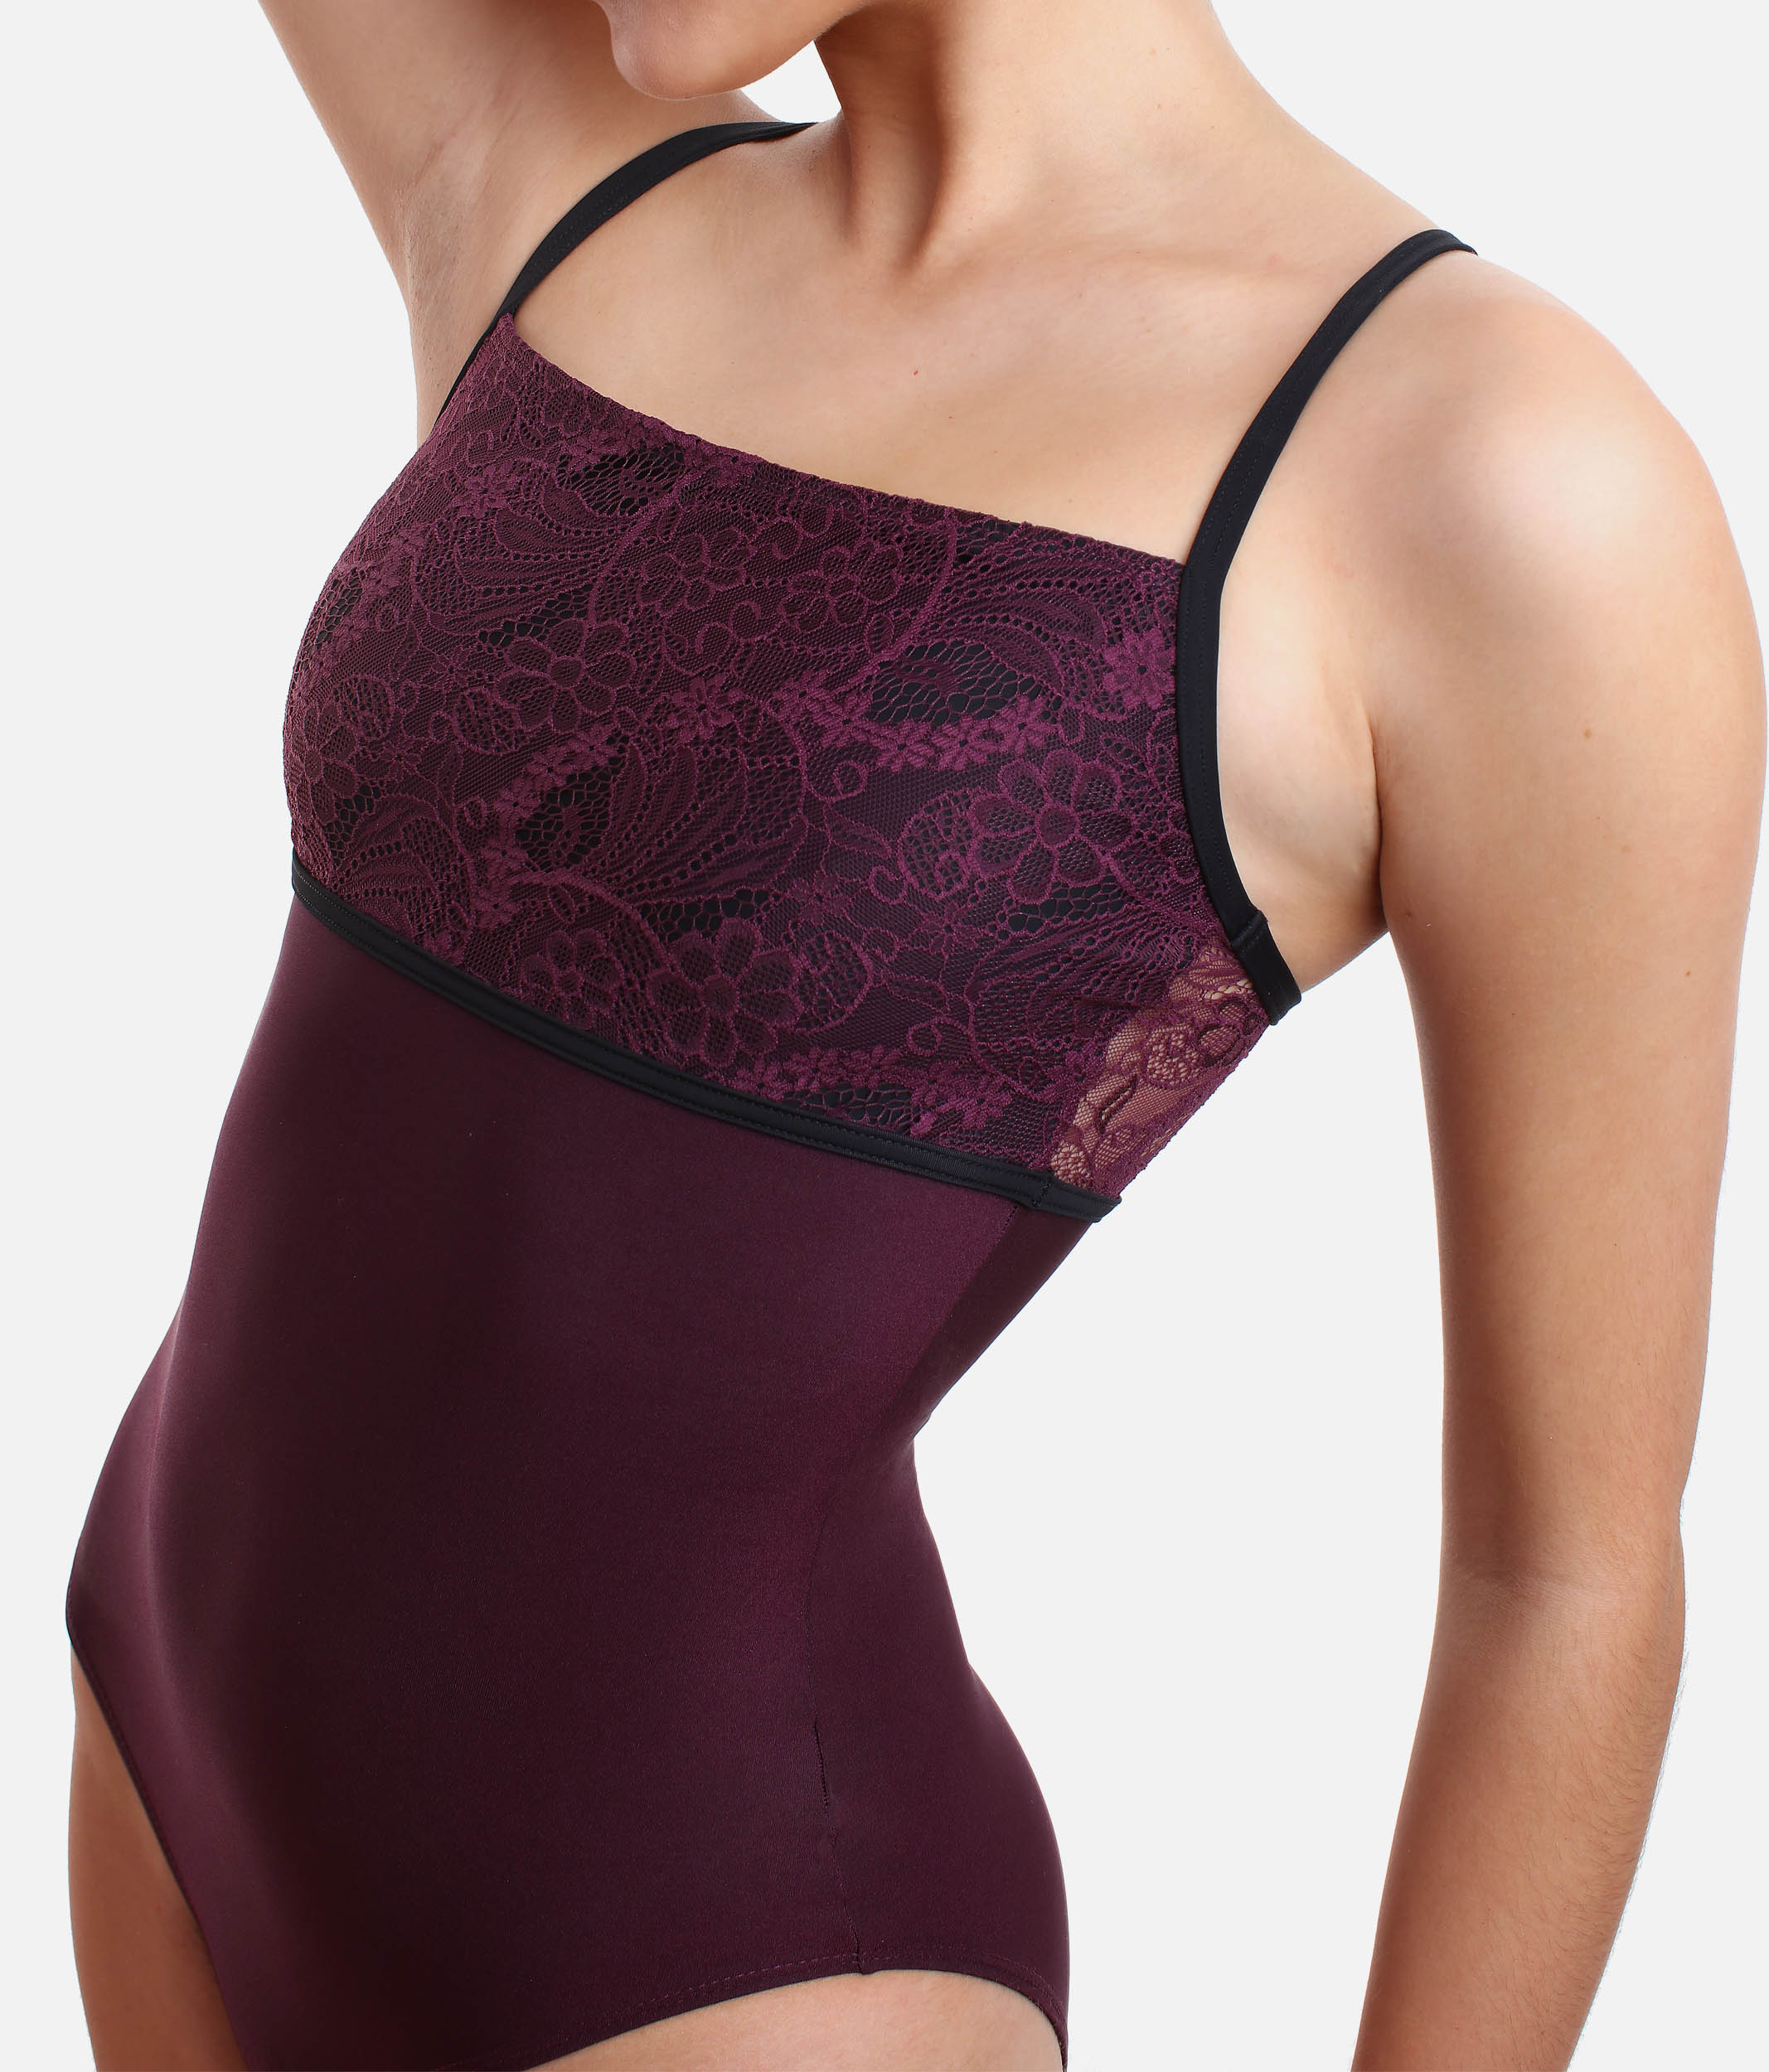 Camisole Leotard With Lace Overlay - GAIA